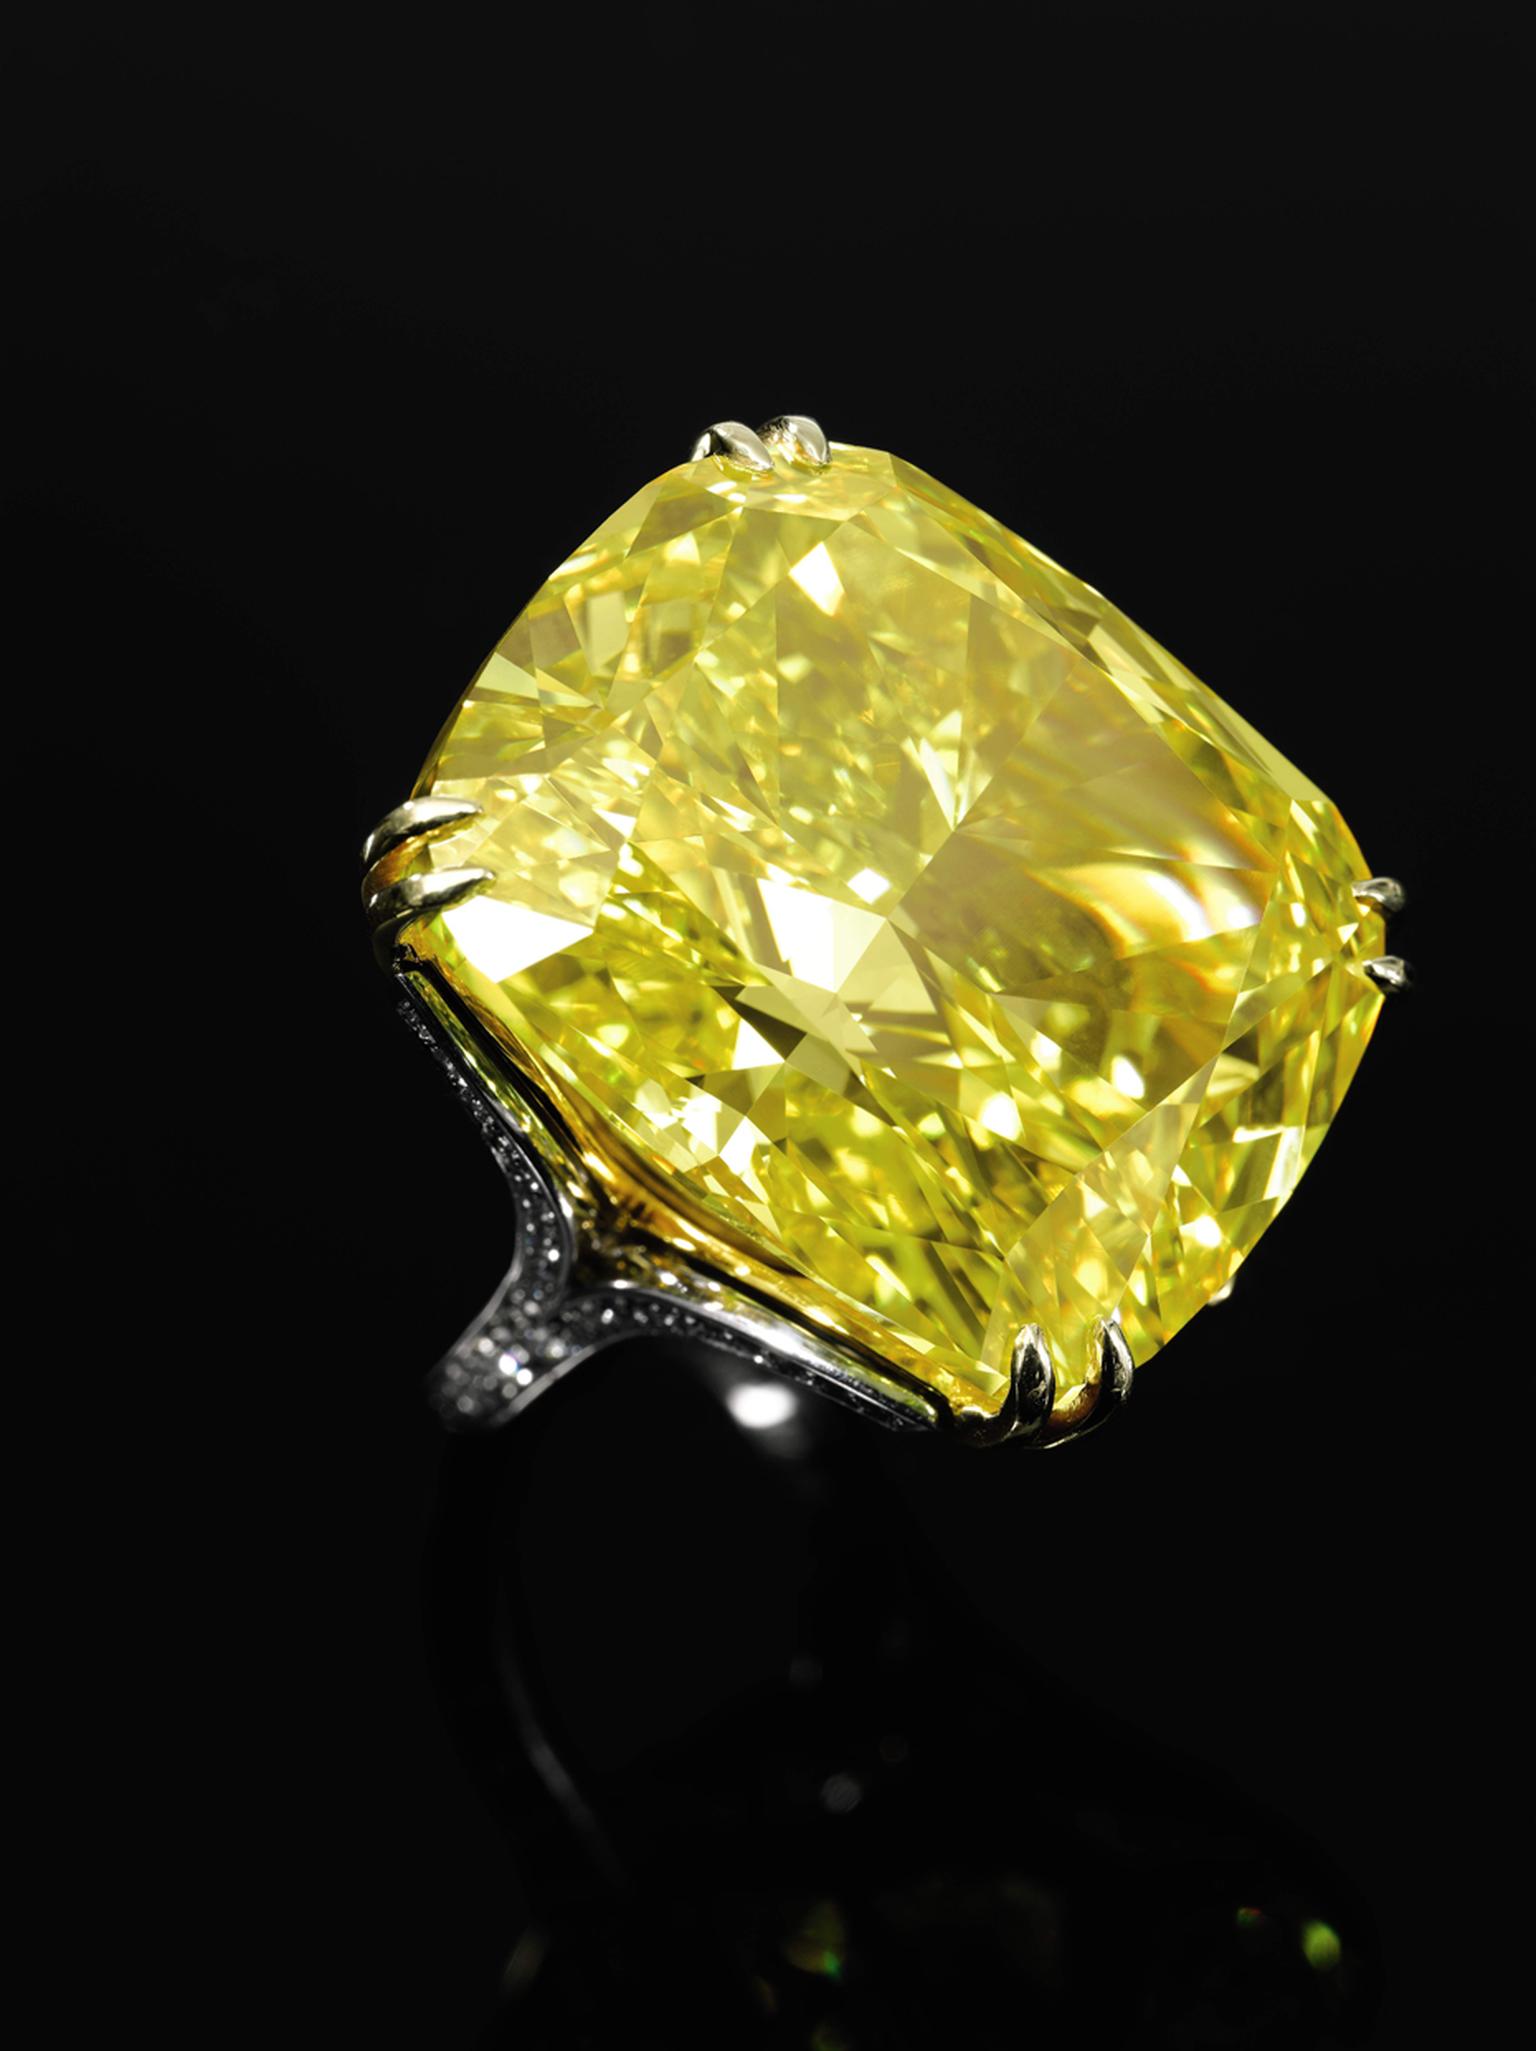 The Graff Vivid Yellow diamond ring is a detachable piece that may also be worn as a pendant. Sold for CHF 14.5million (estimate: CHF 13.4- 22.3million). Image by: Sothebys.